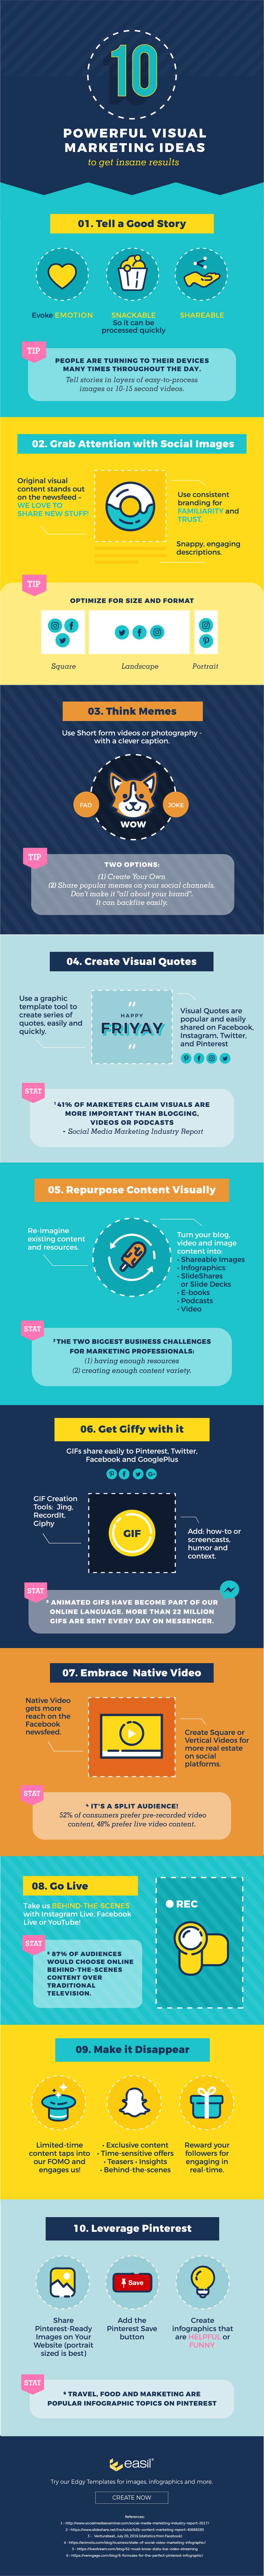 15 Powerful Visual Marketing Ideas That Will Boost Your Results - #infographic